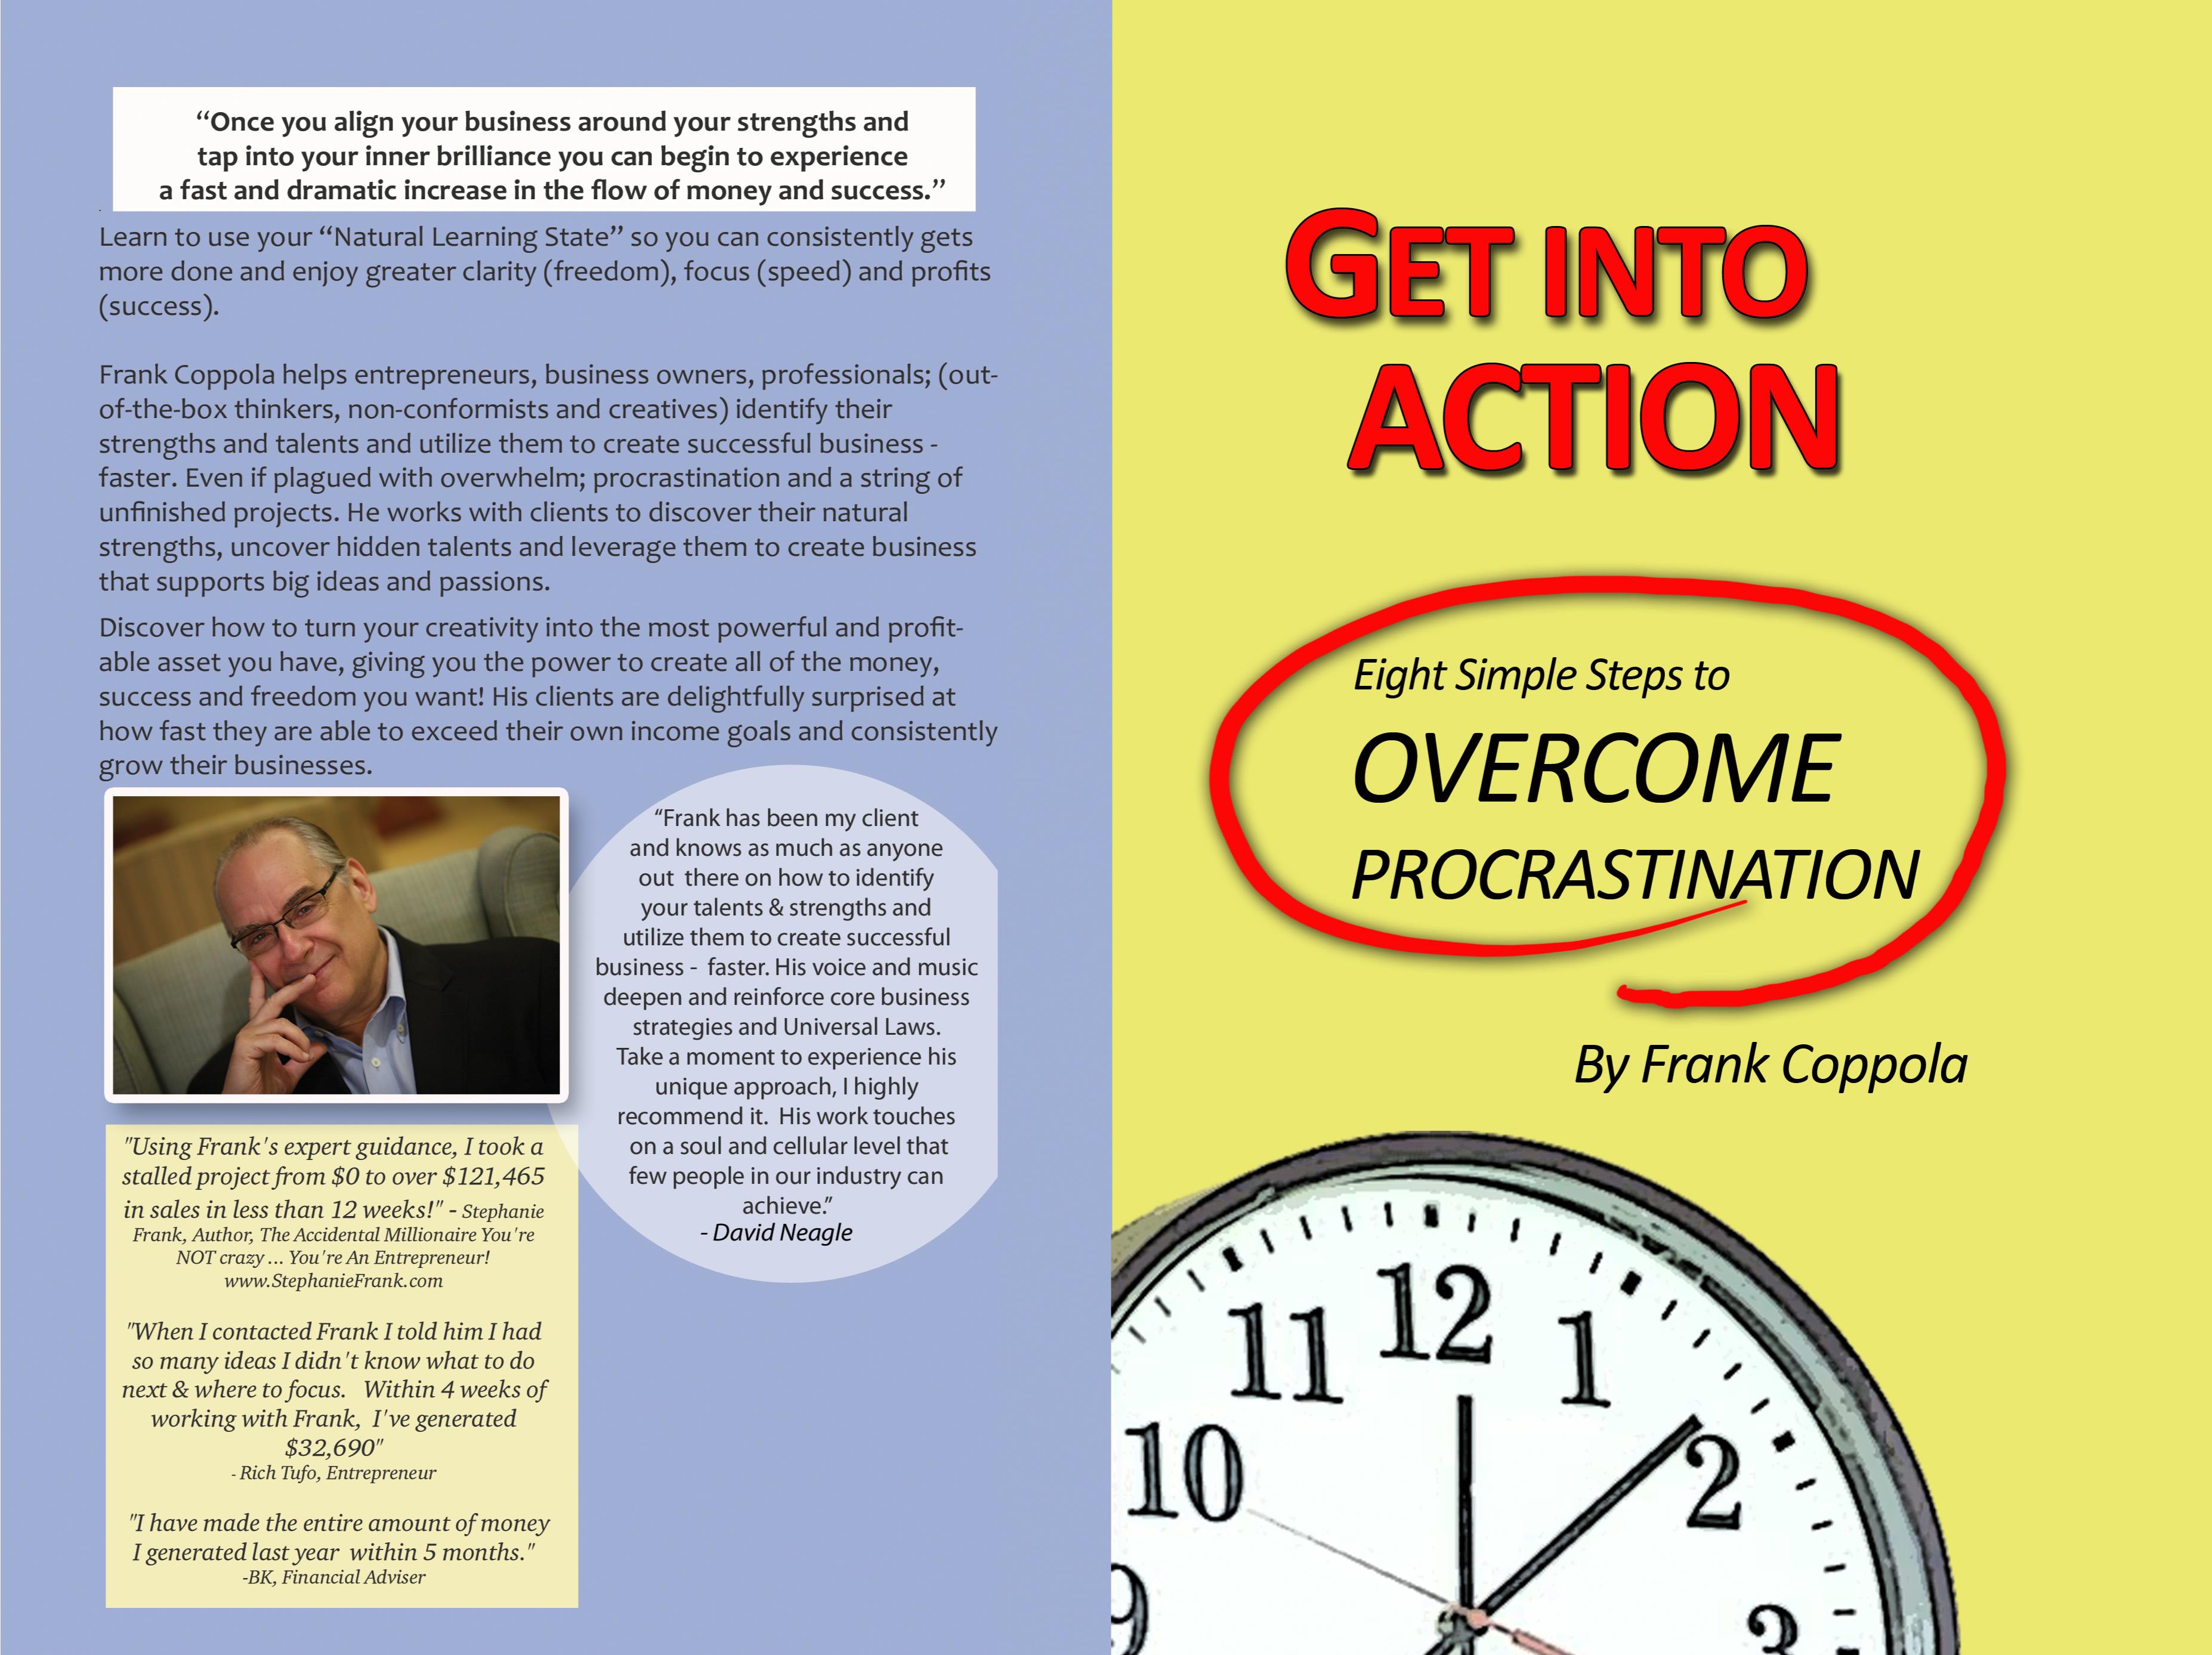 Get Into Action 8 Simple Steps to Overcome Procrastination By Frank Coppola cover image